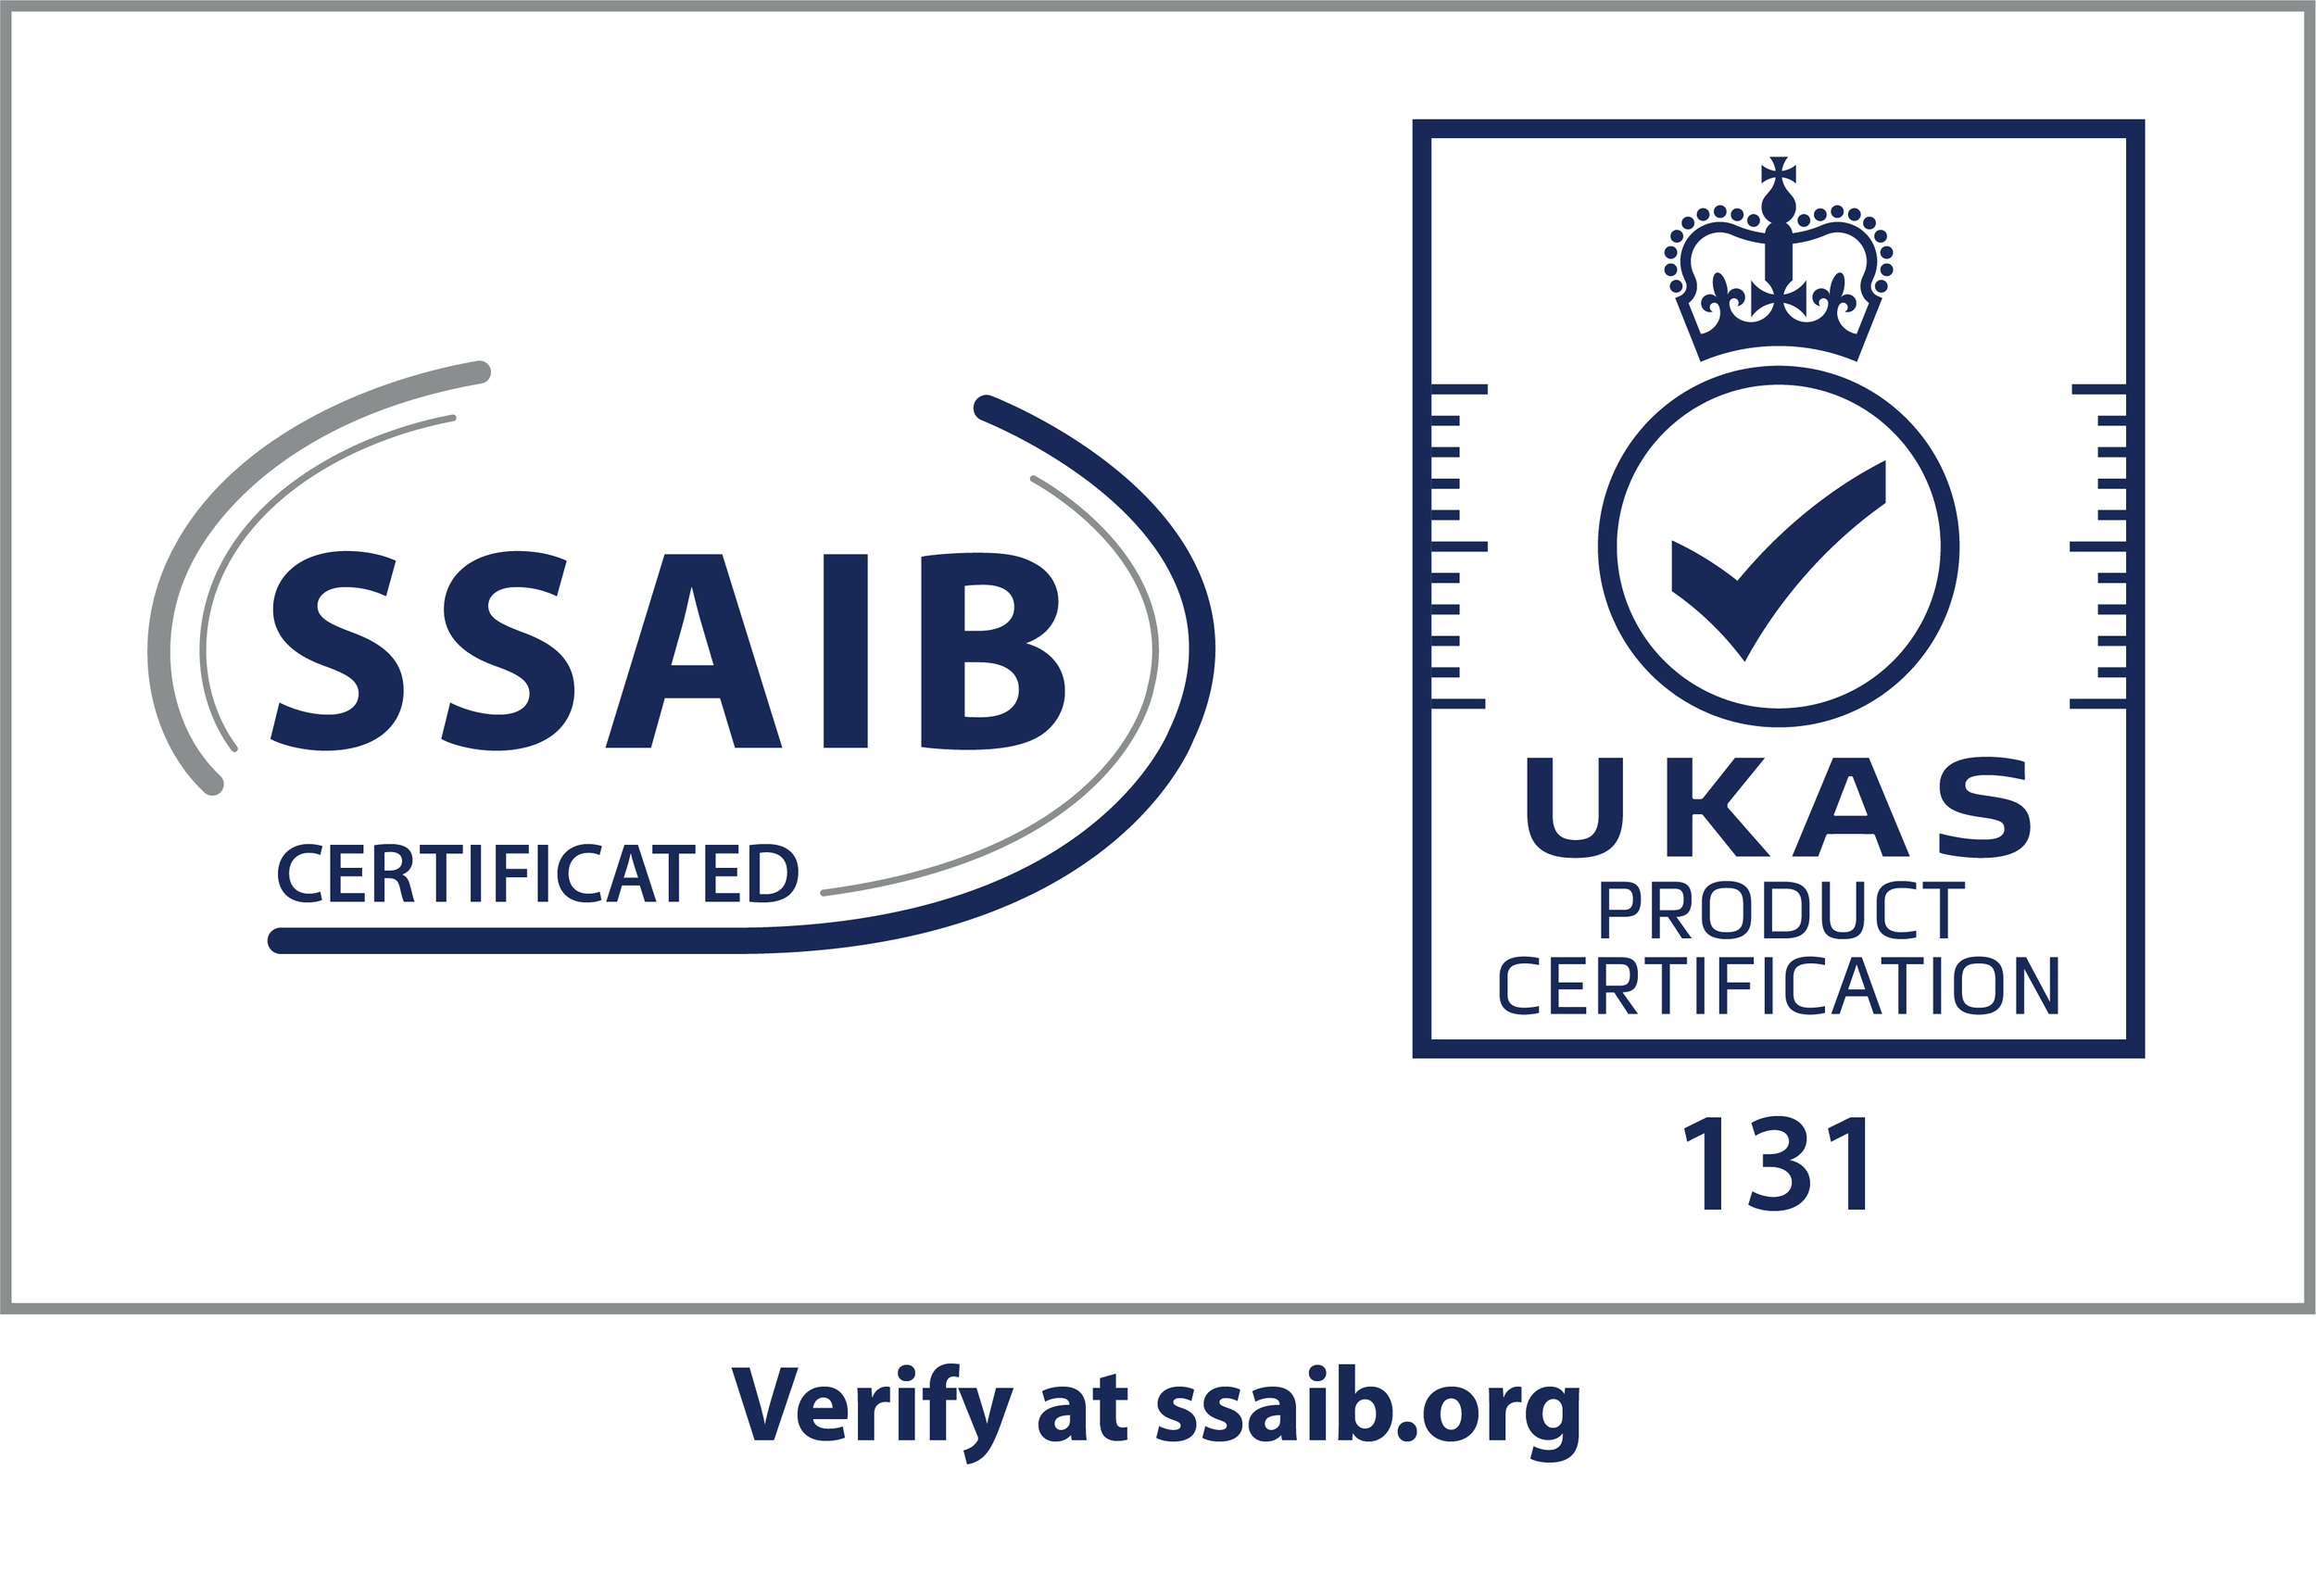 ssaib-ukas1product1certification-full-cmyk-verify.png